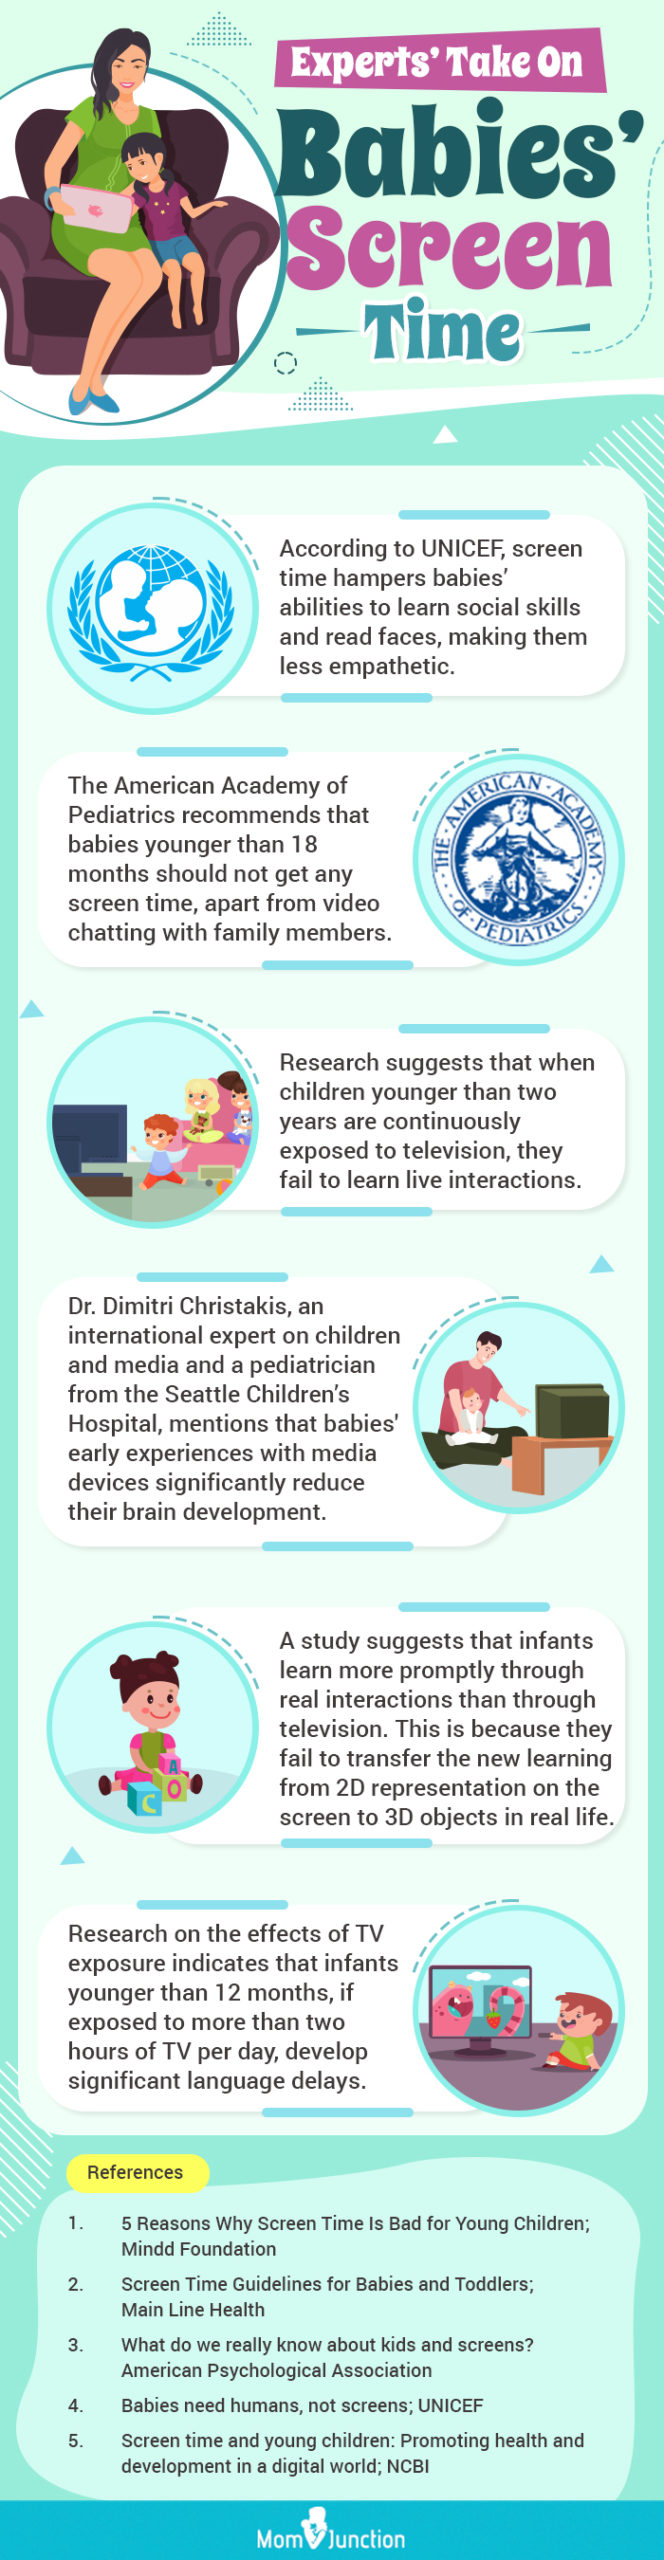 experts take on babies screen time [infographic]